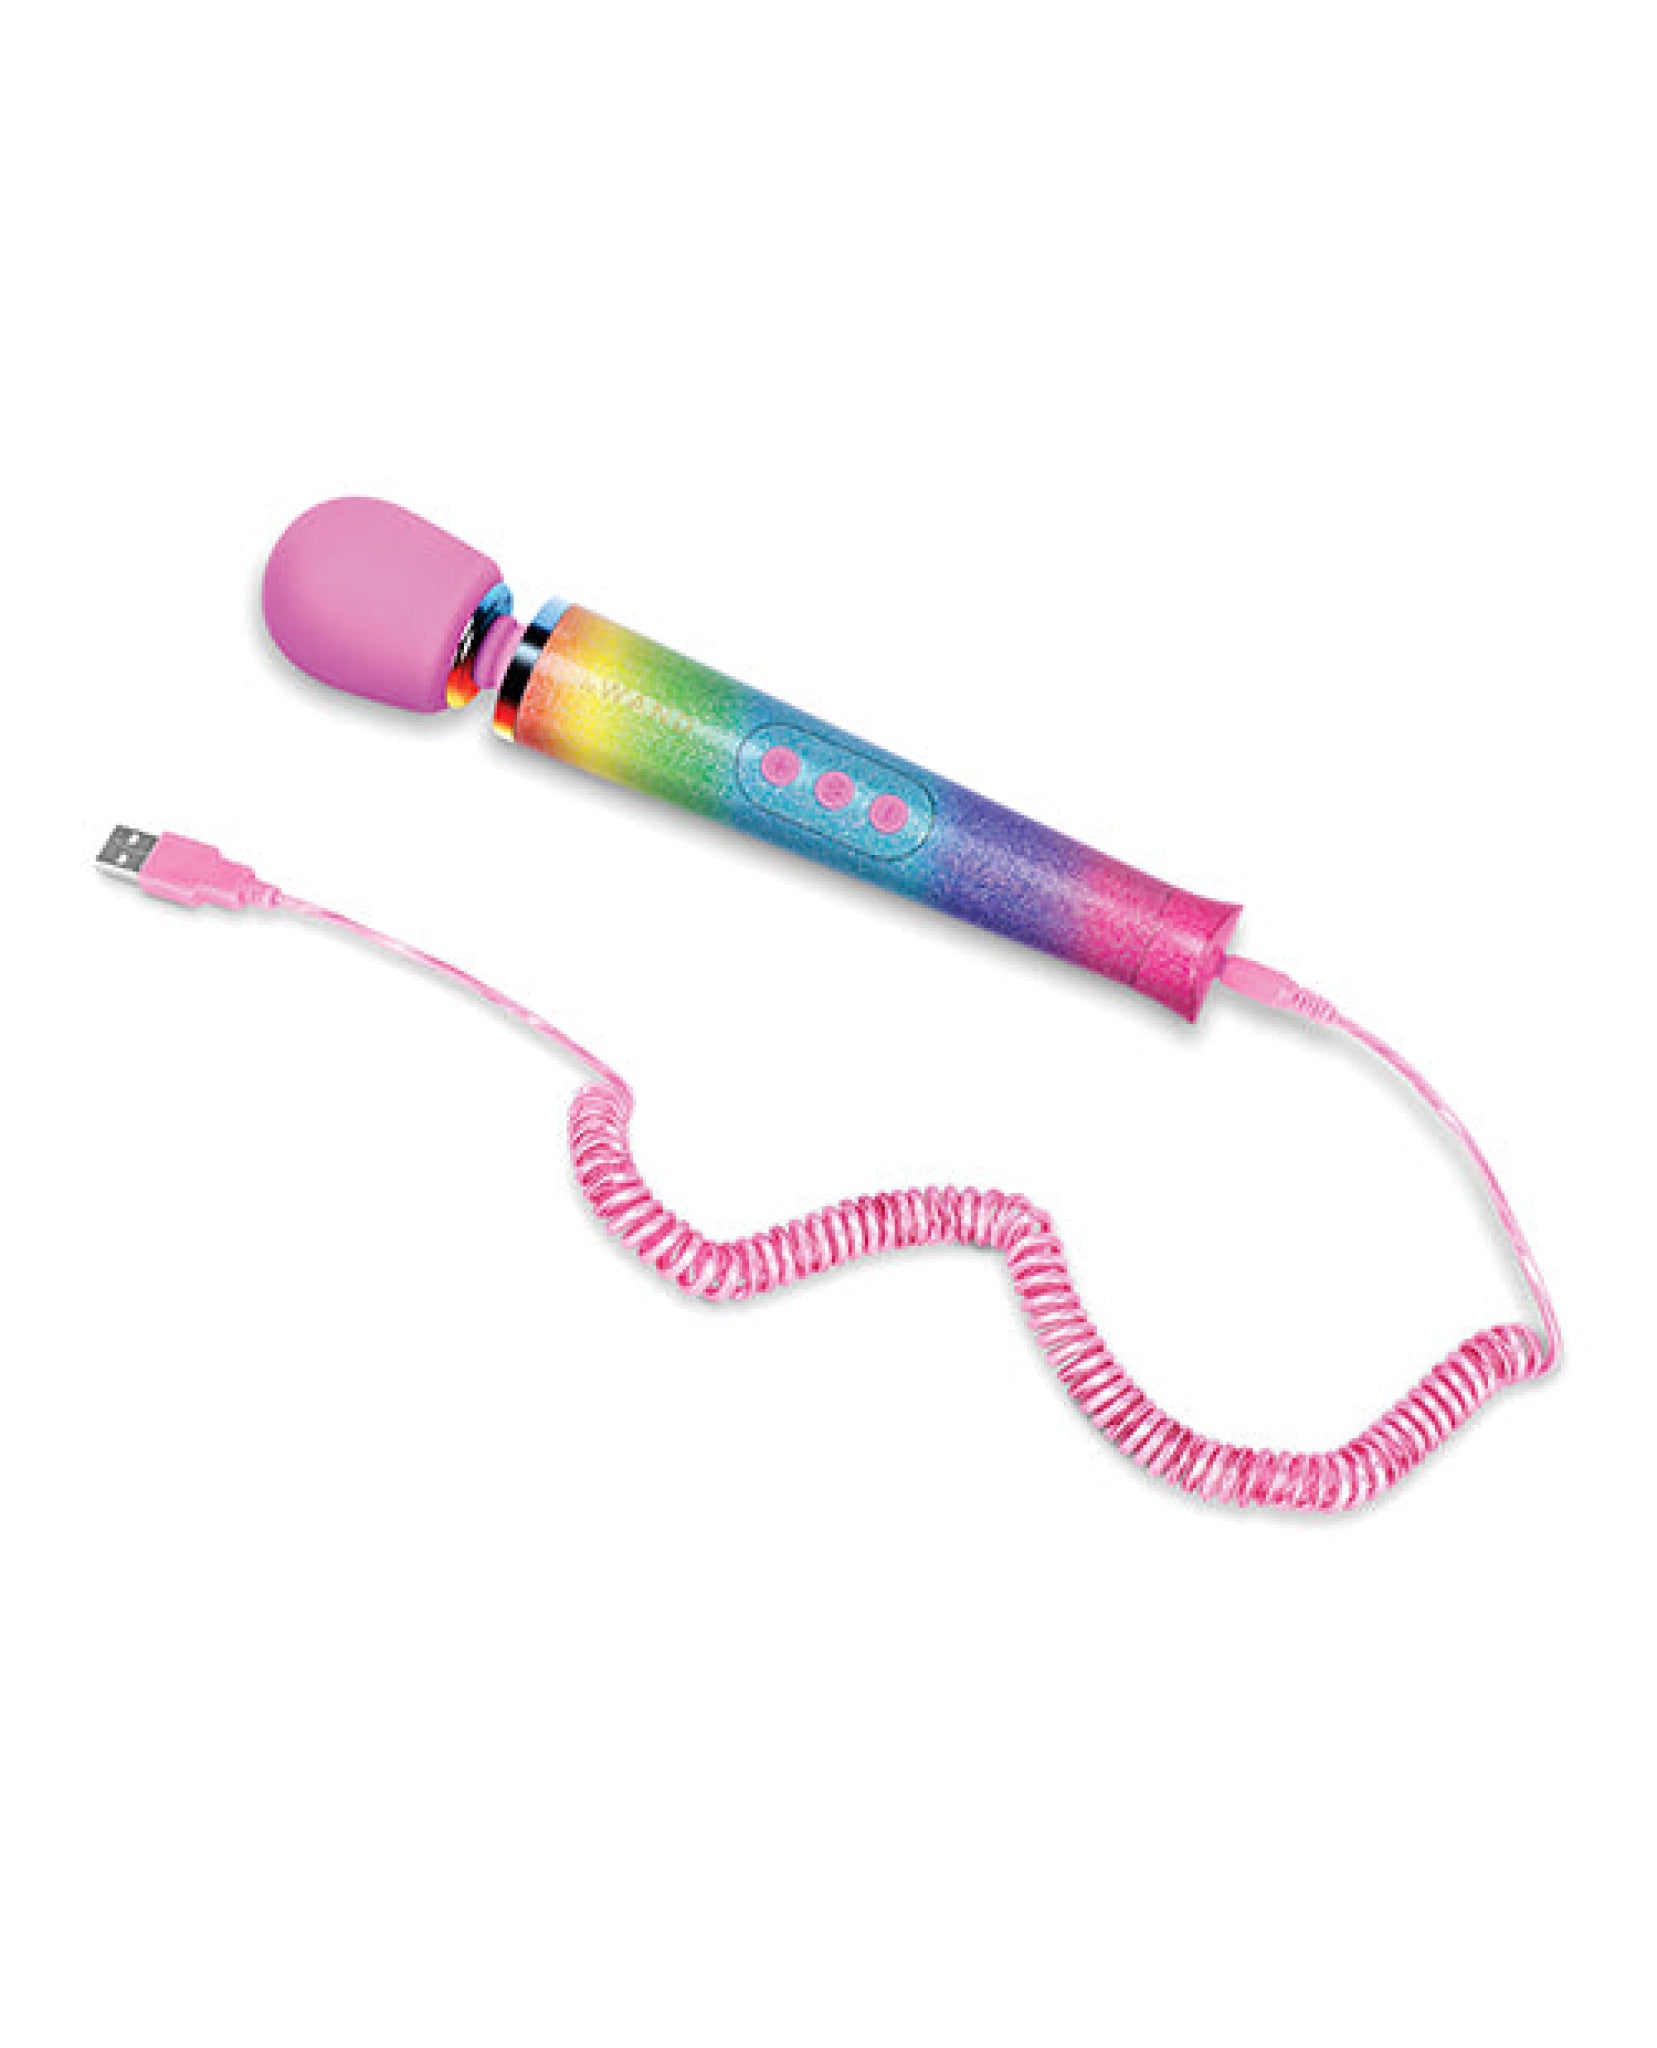 Le Wand Petite Rechargeable Vibrating Massager - Rainbow Le Wand